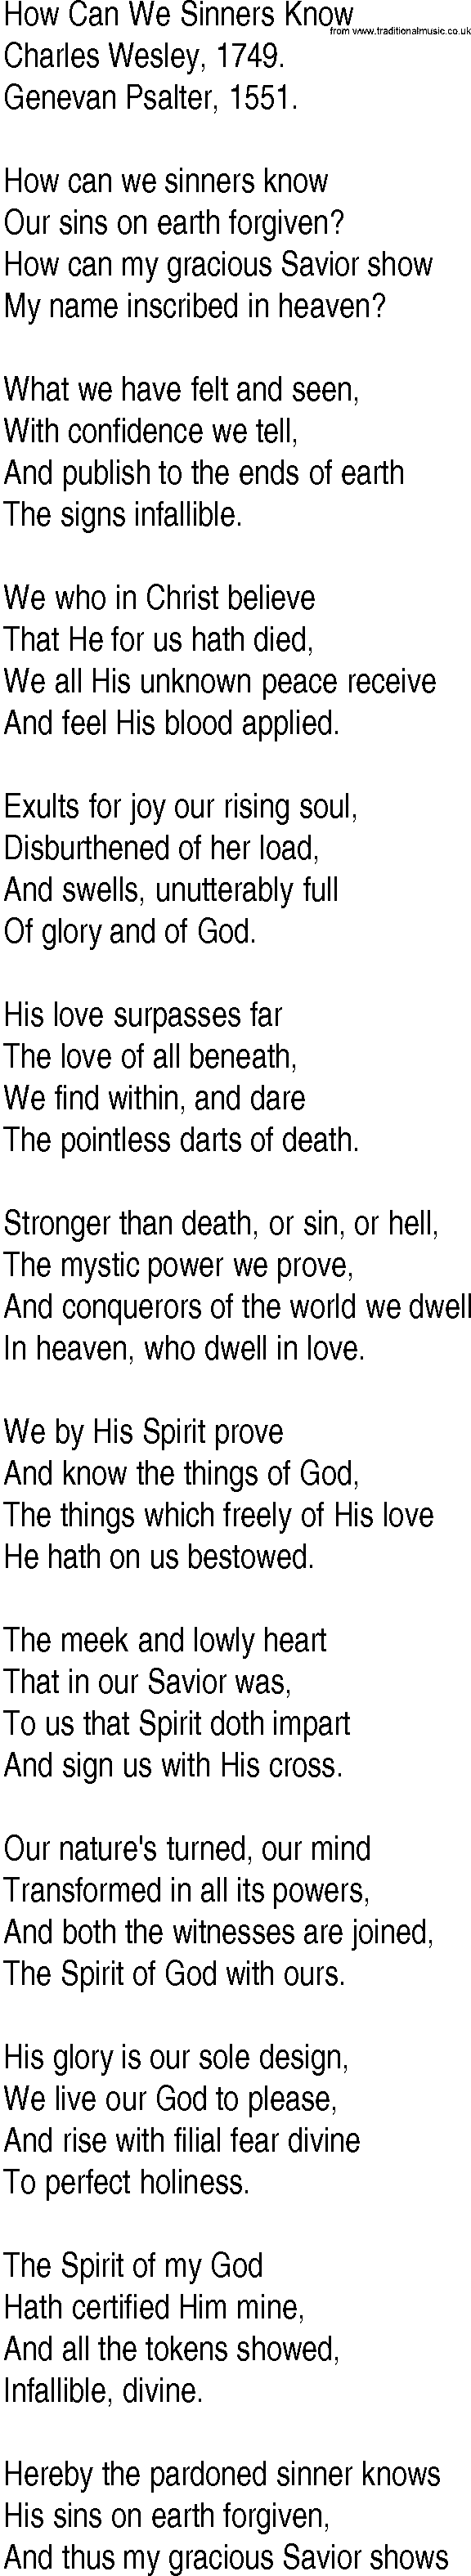 Hymn and Gospel Song: How Can We Sinners Know by Charles Wesley lyrics